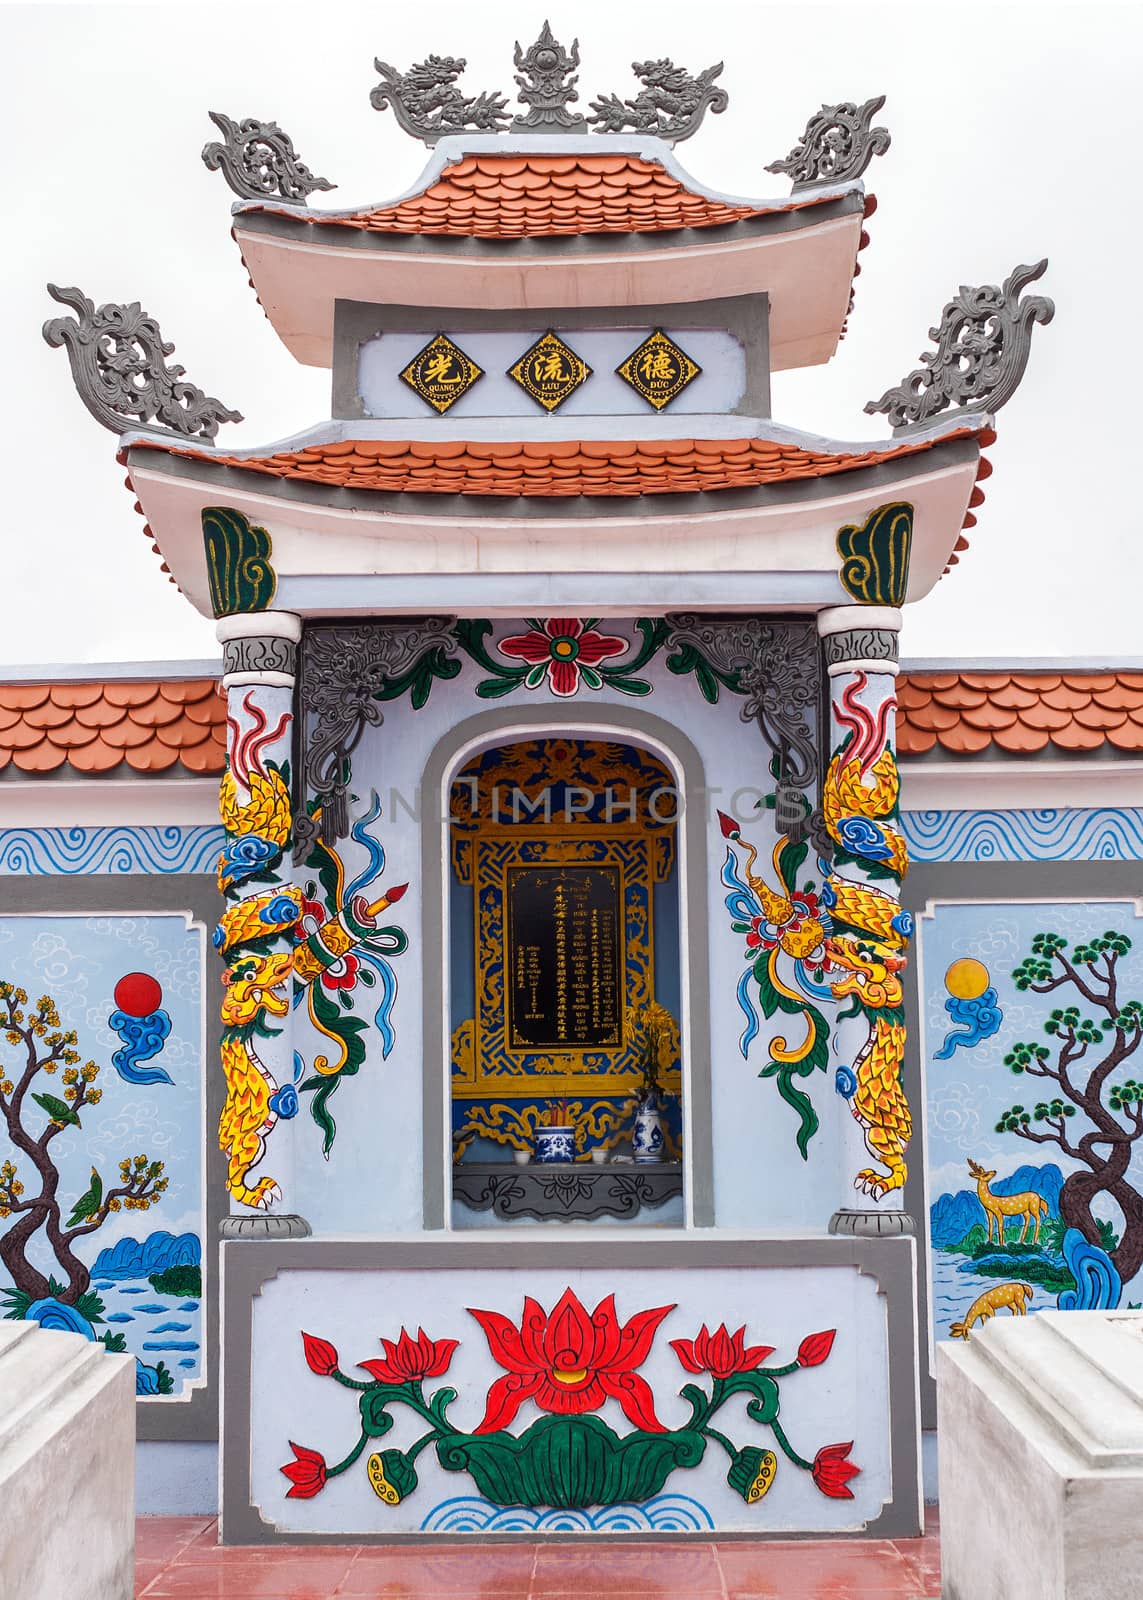 Vietnam Quang Binh Province: Shrine as altar on family grave plot in cemetery. by Claudine